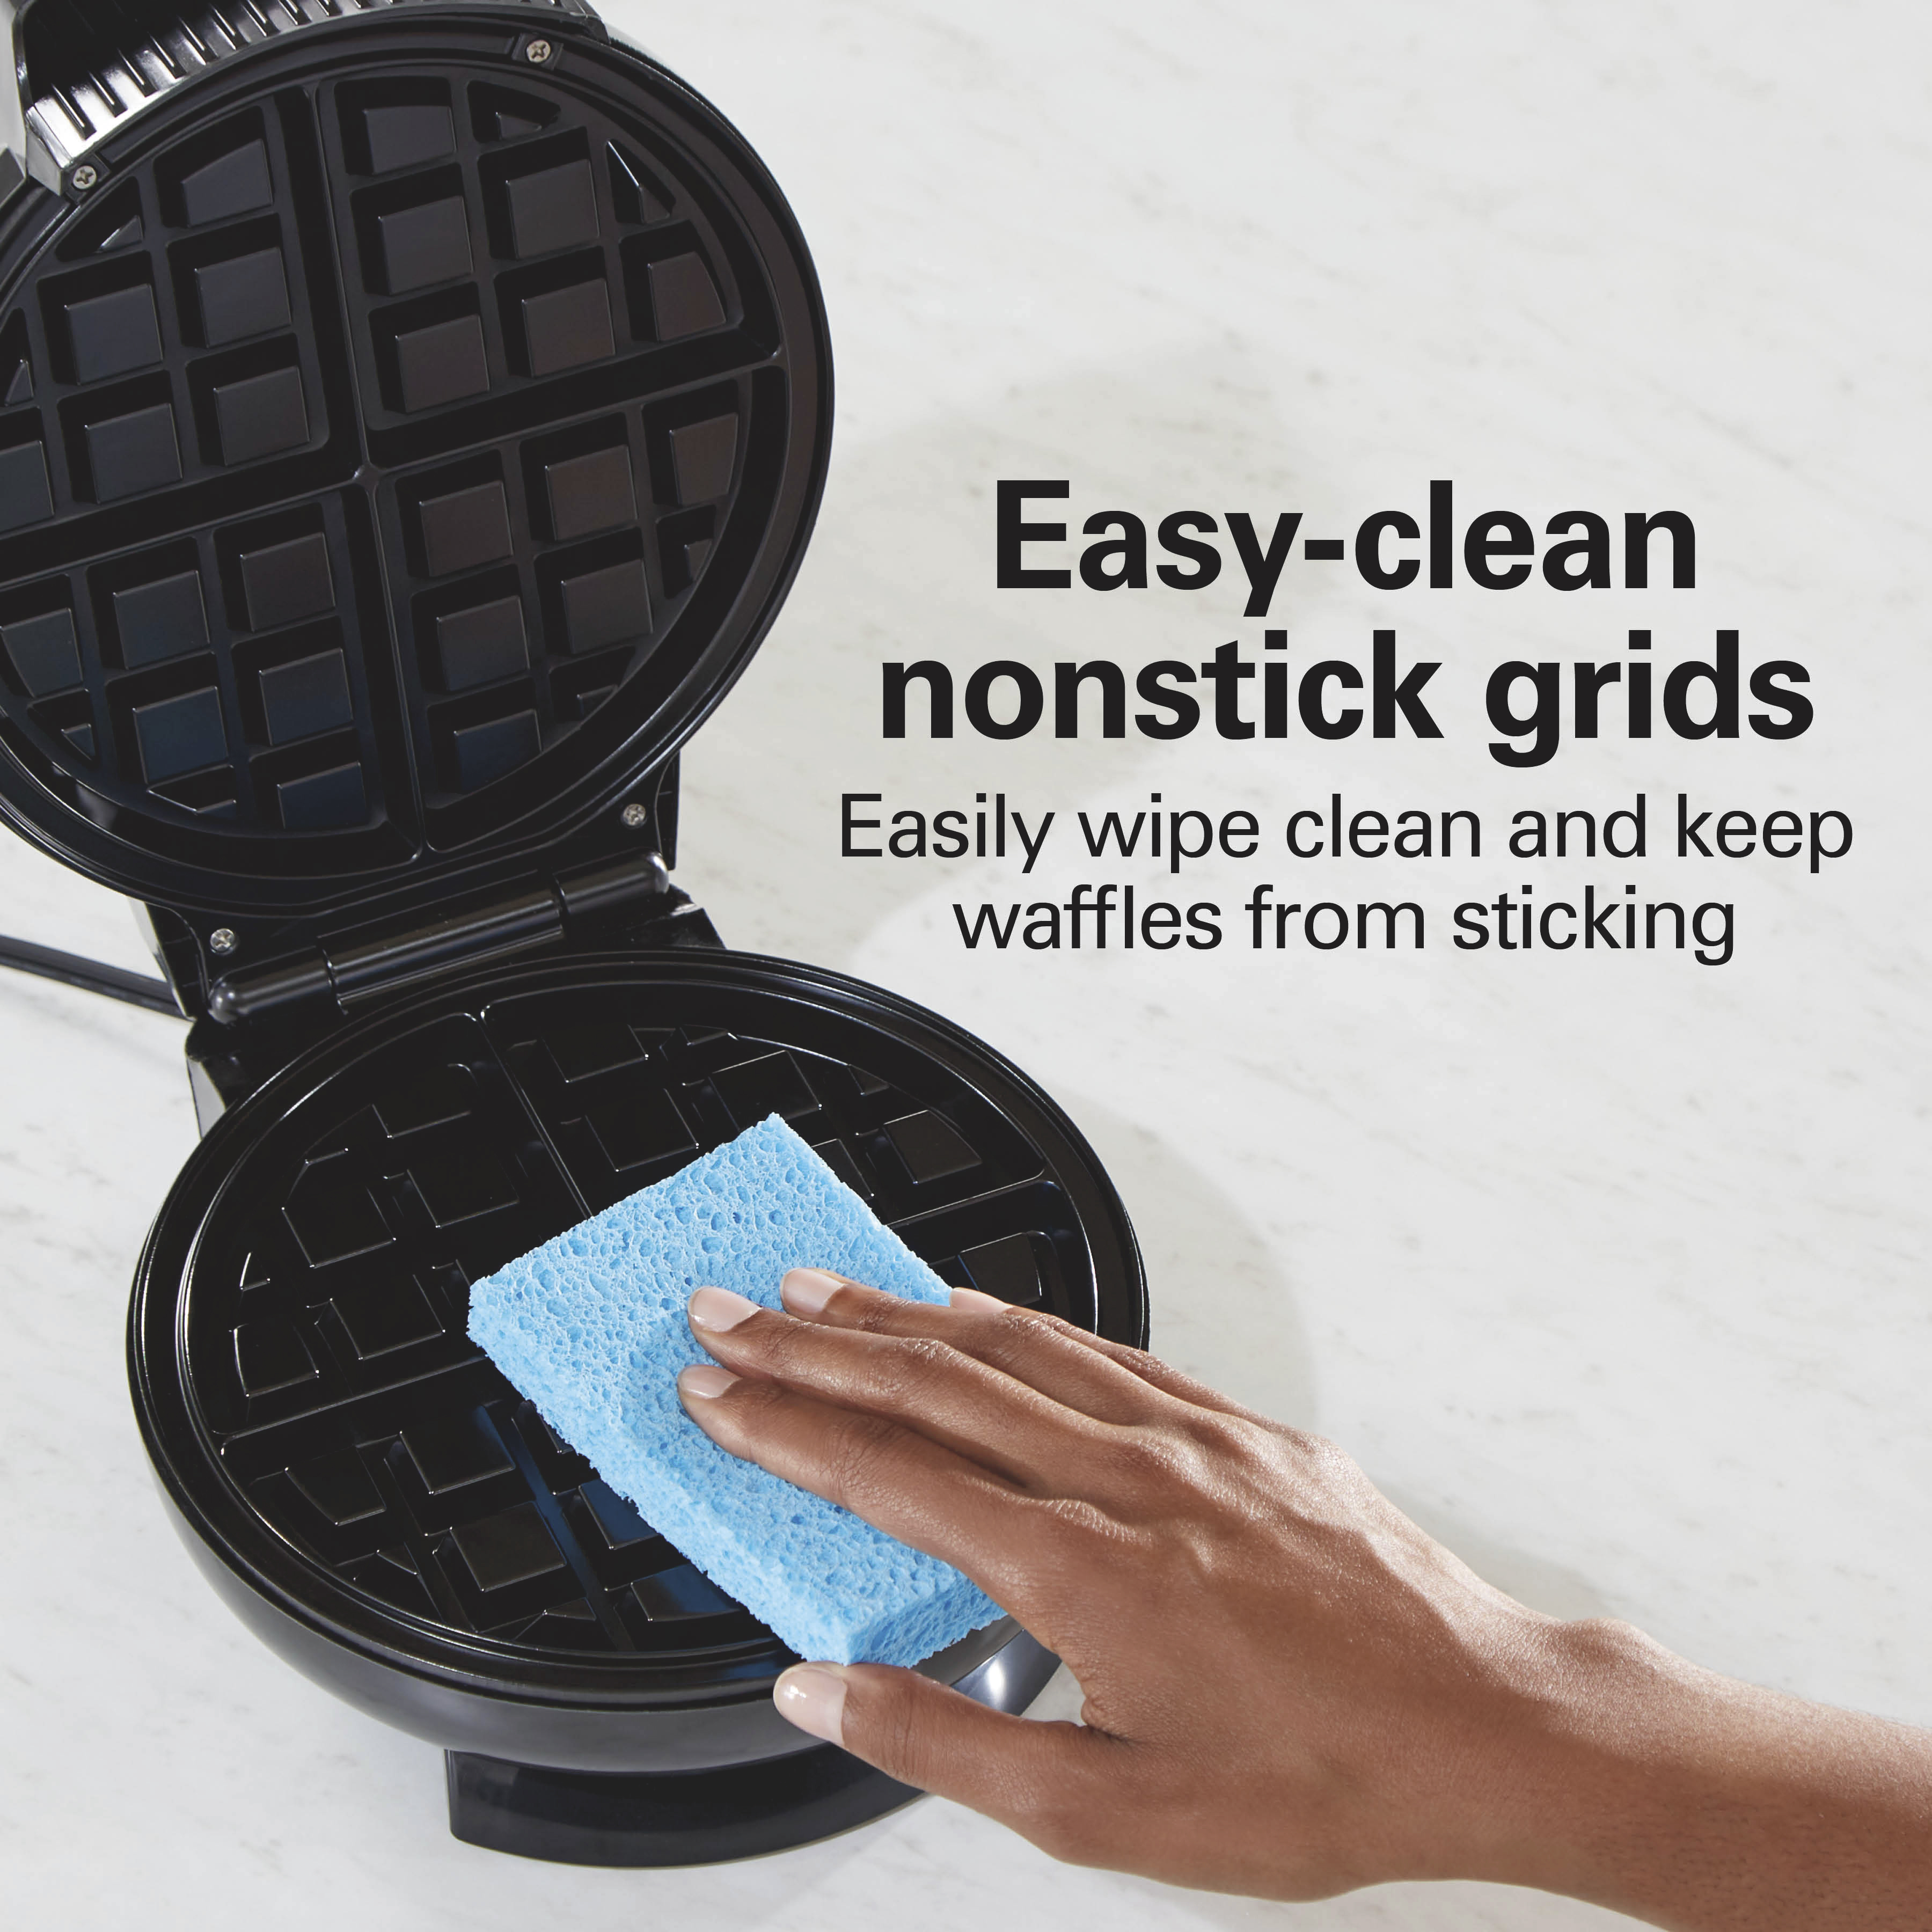 Hamilton Beach Belgian Waffle Maker with Easy to Clean Non-Stick Plates, Black 26072 - image 4 of 8